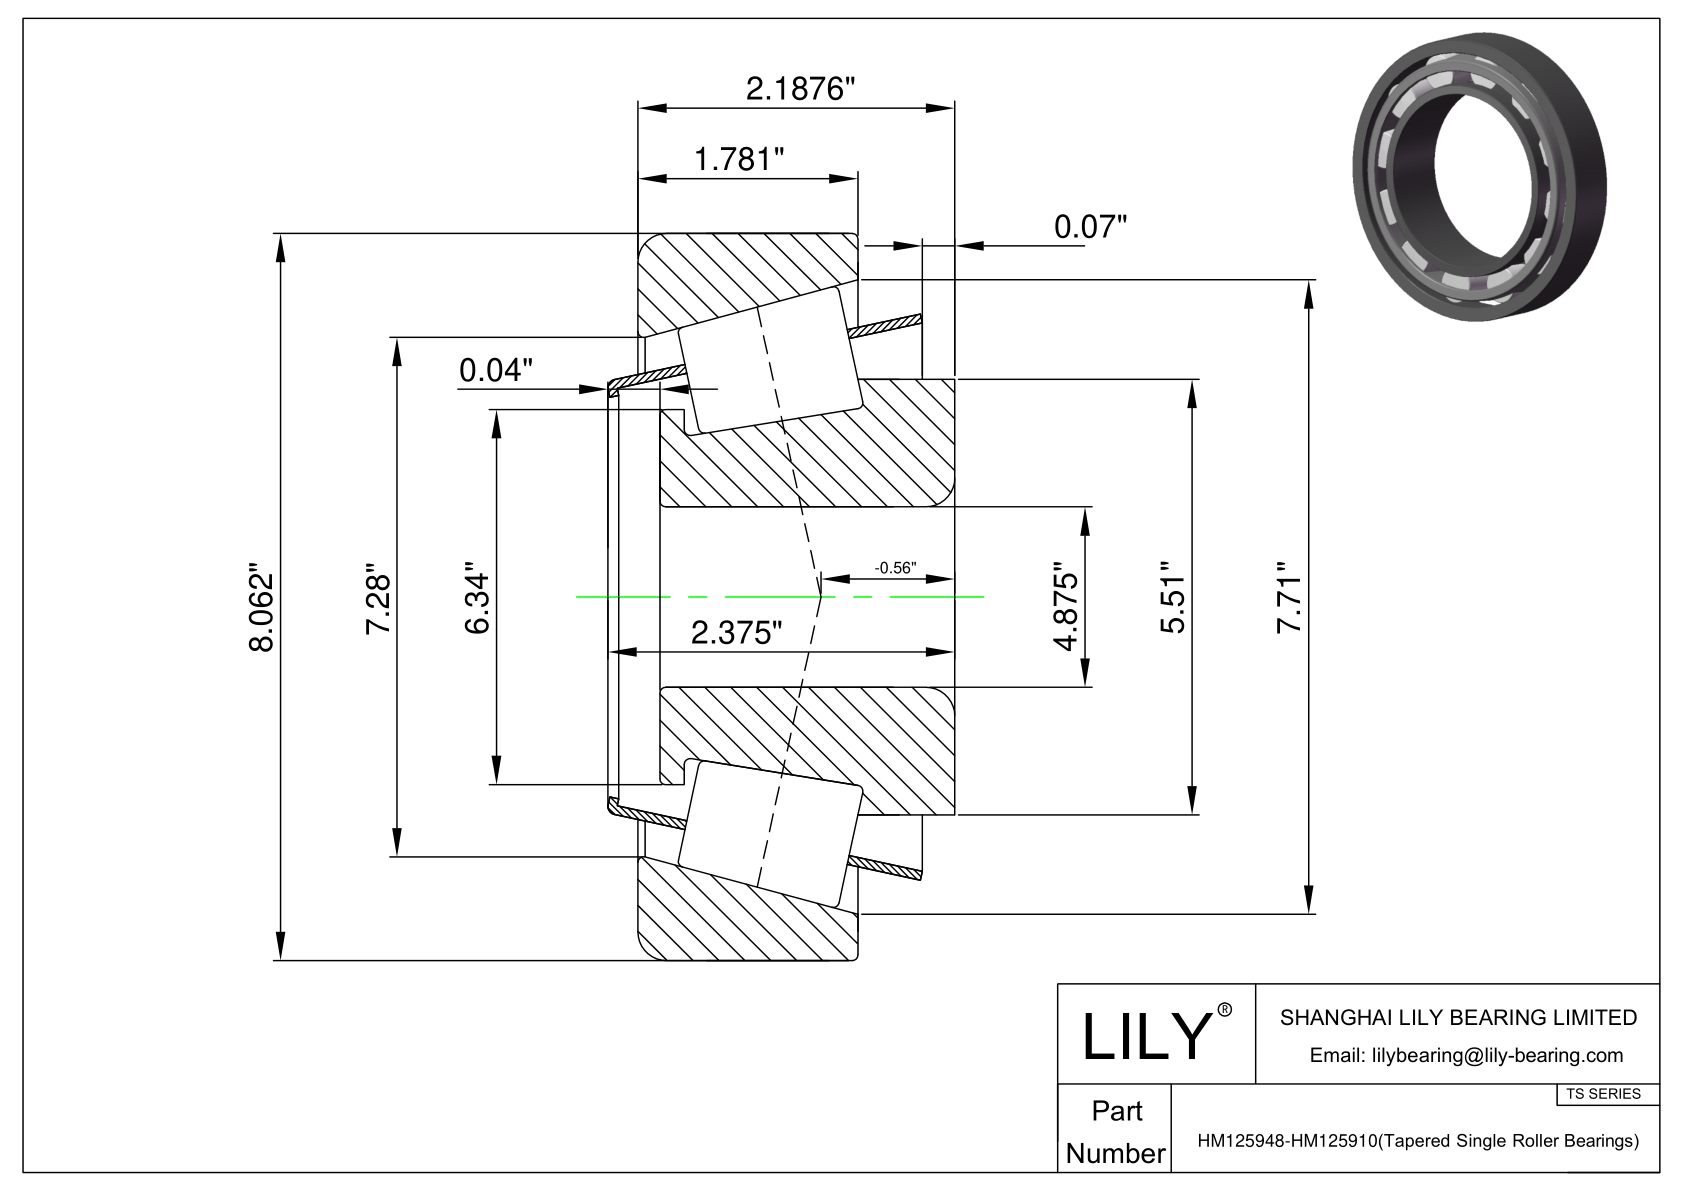 HM125948-HM125910 TS (Tapered Single Roller Bearings) (Imperial) cad drawing